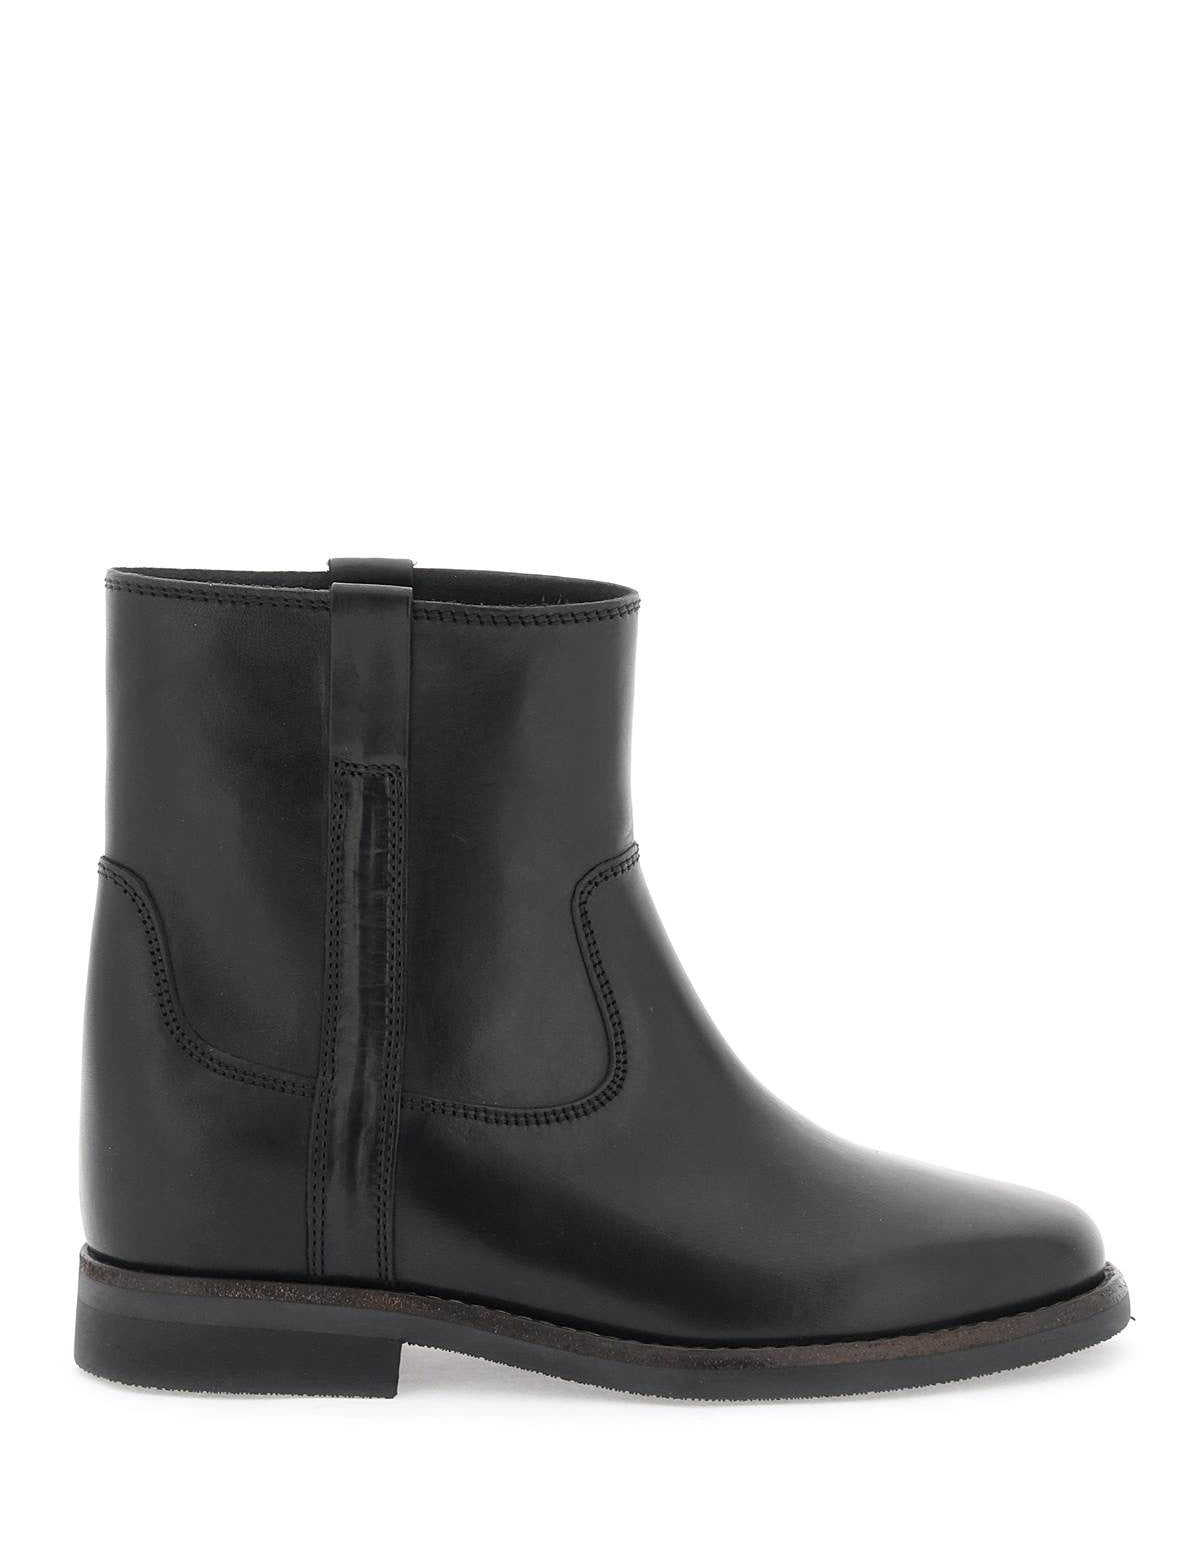 isabel-marant-susee-ankle-boots.jpg